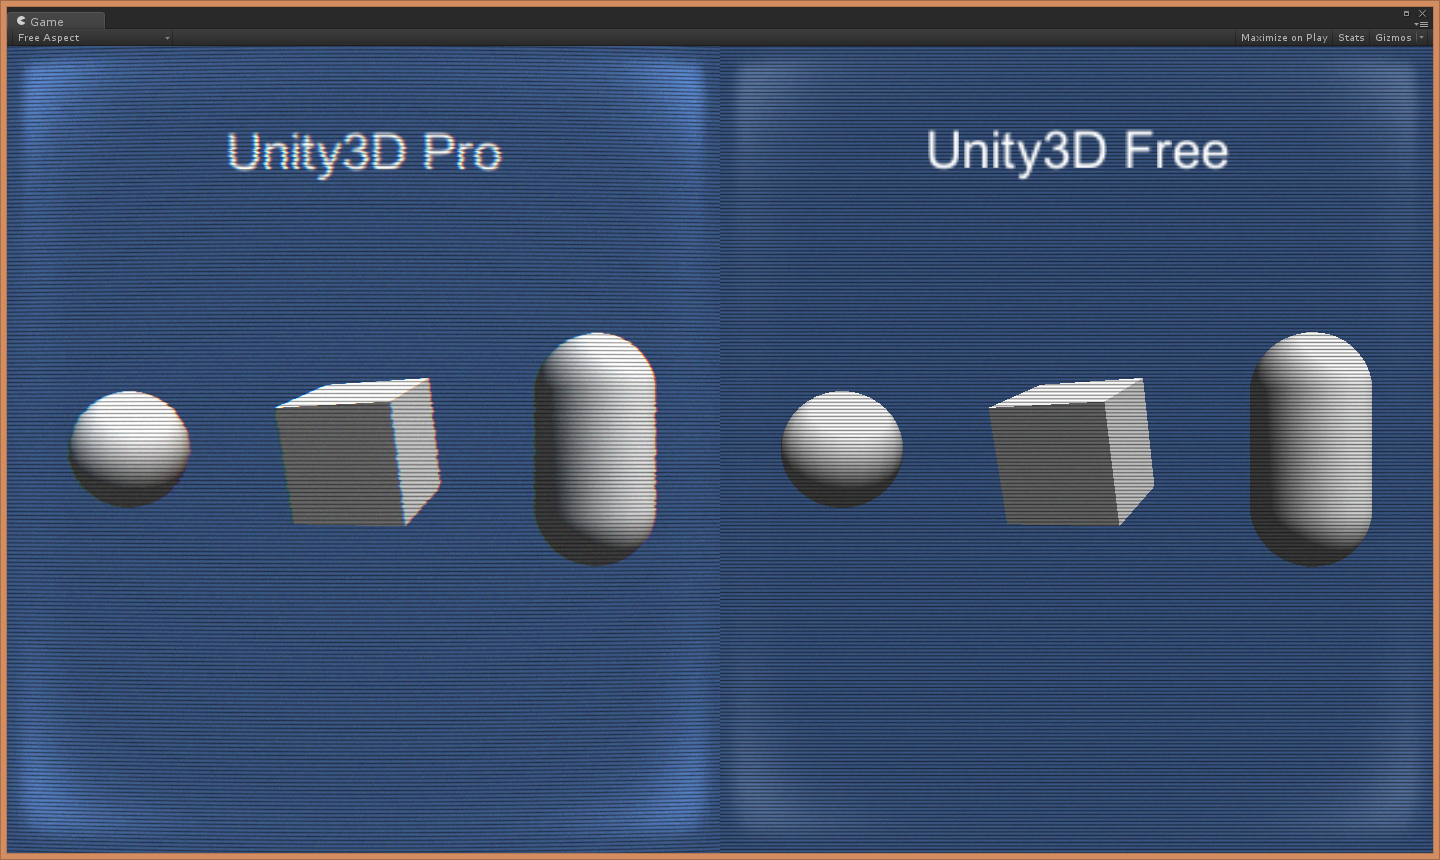 Released] OLD TV Post Processing Filter - Unity Forum